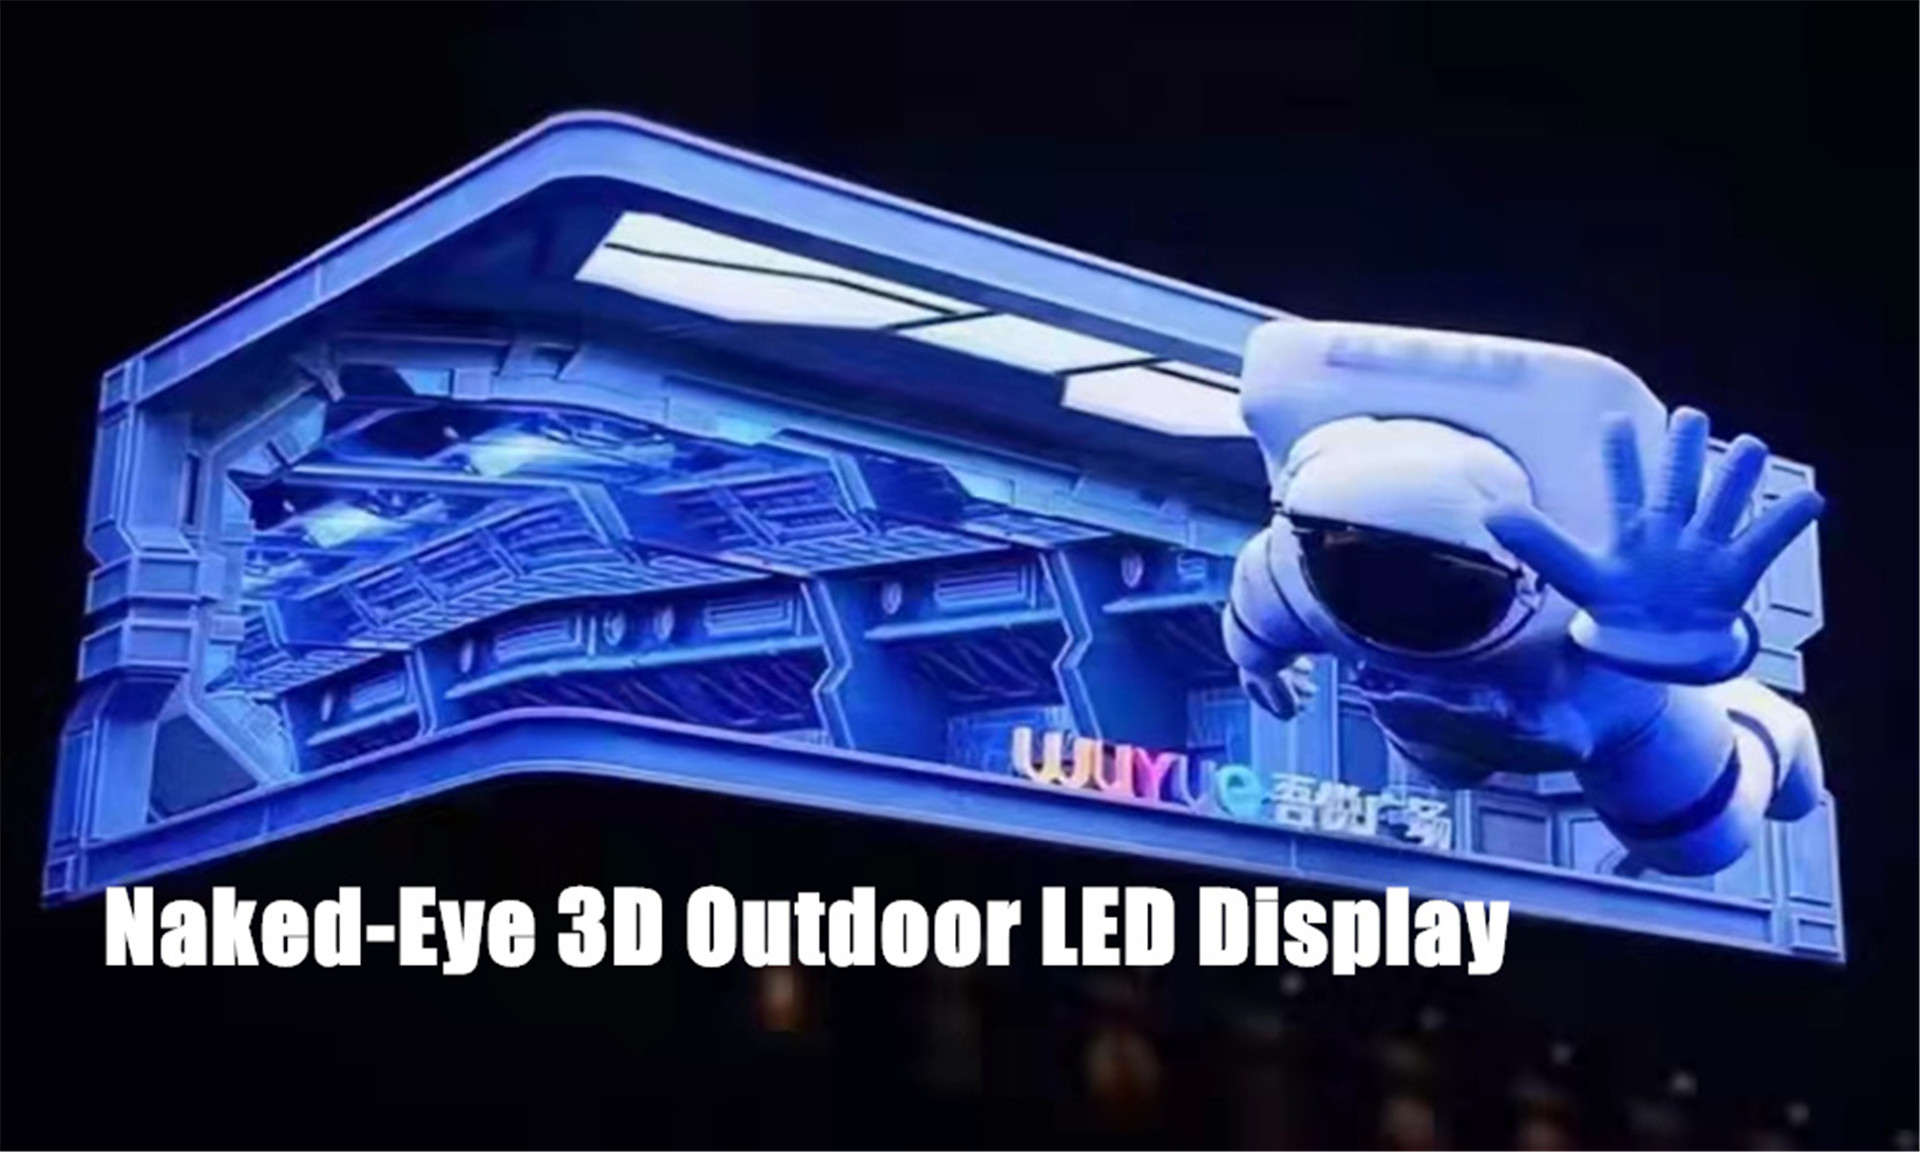 1 Naked eye 3d outdoor led display